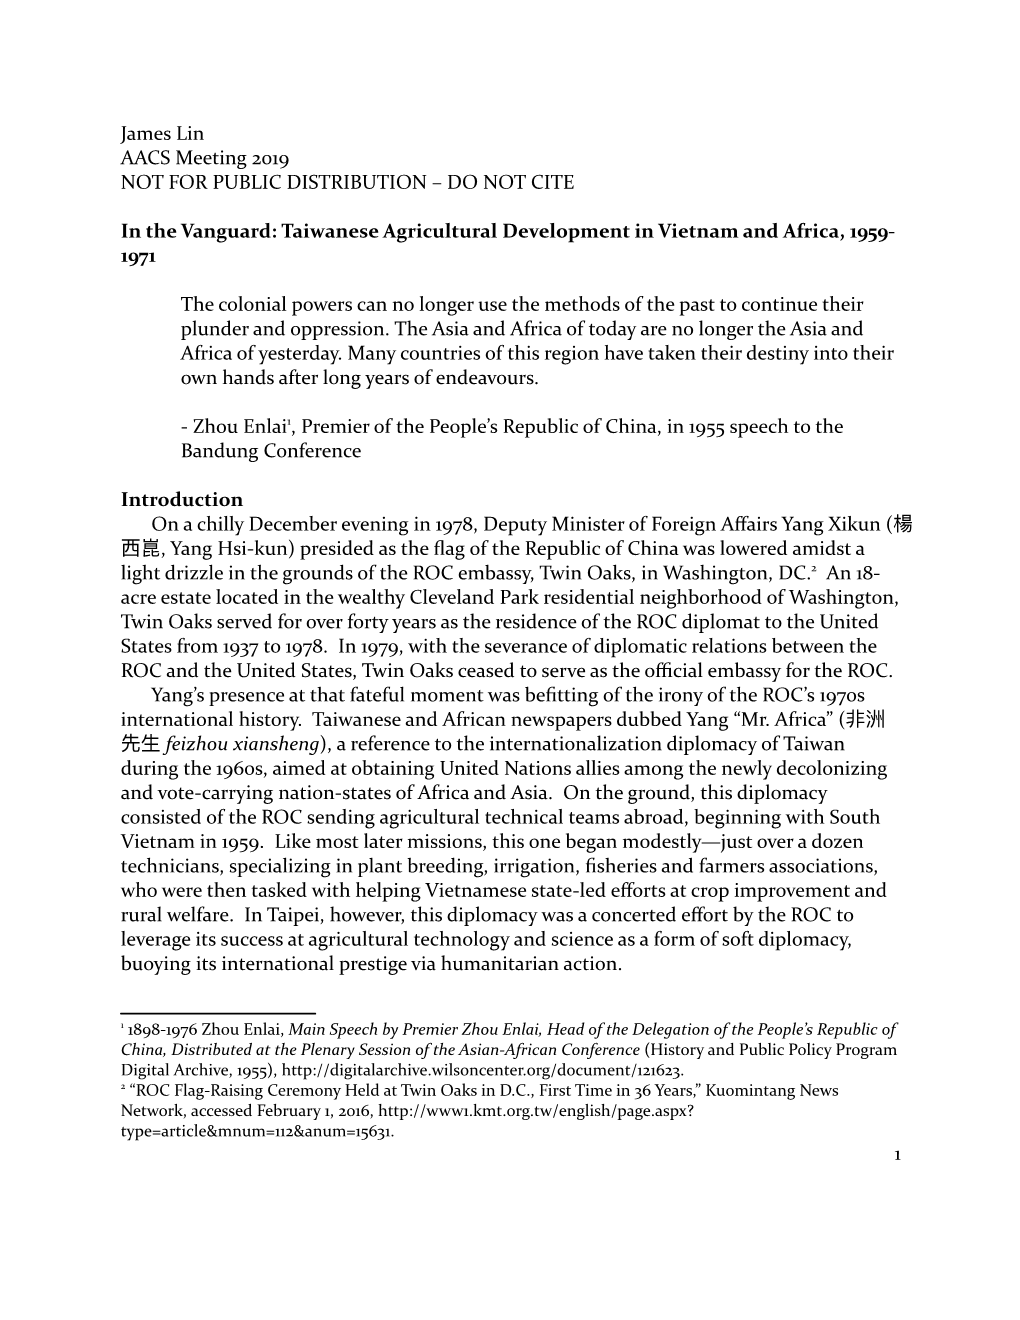 Taiwanese Agricultural Development in Vietnam and Africa, 1959-1971